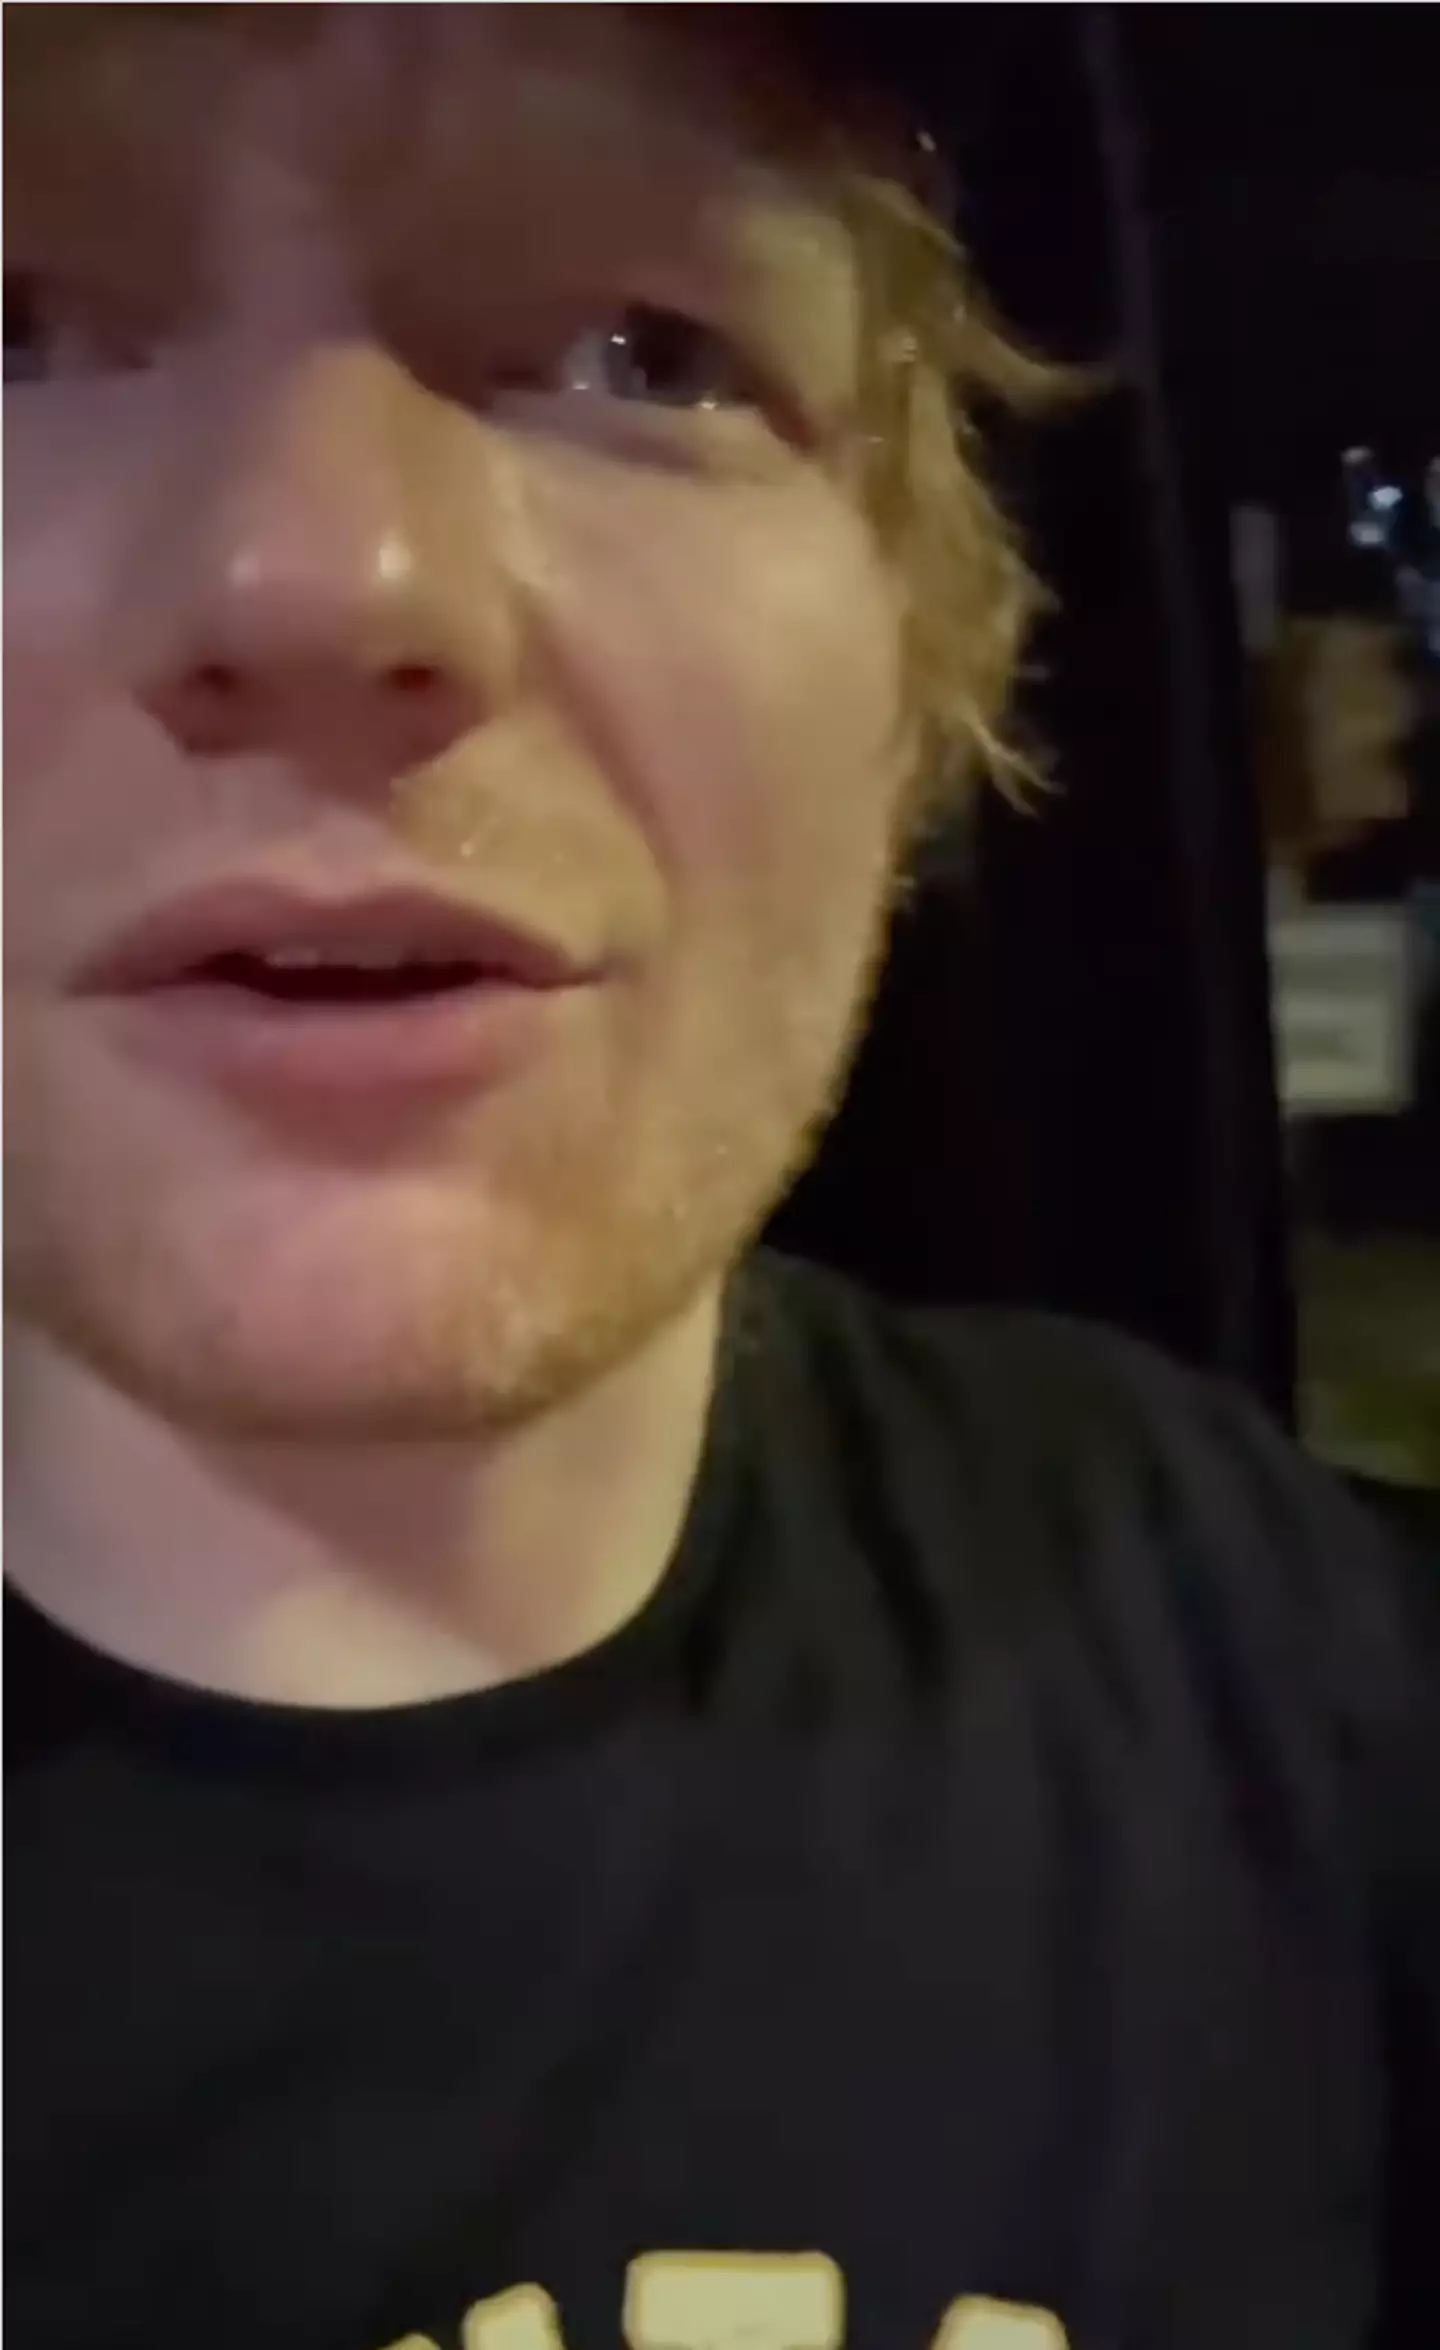 Ed Sheeran visited a bar he used to go to back in 2013.